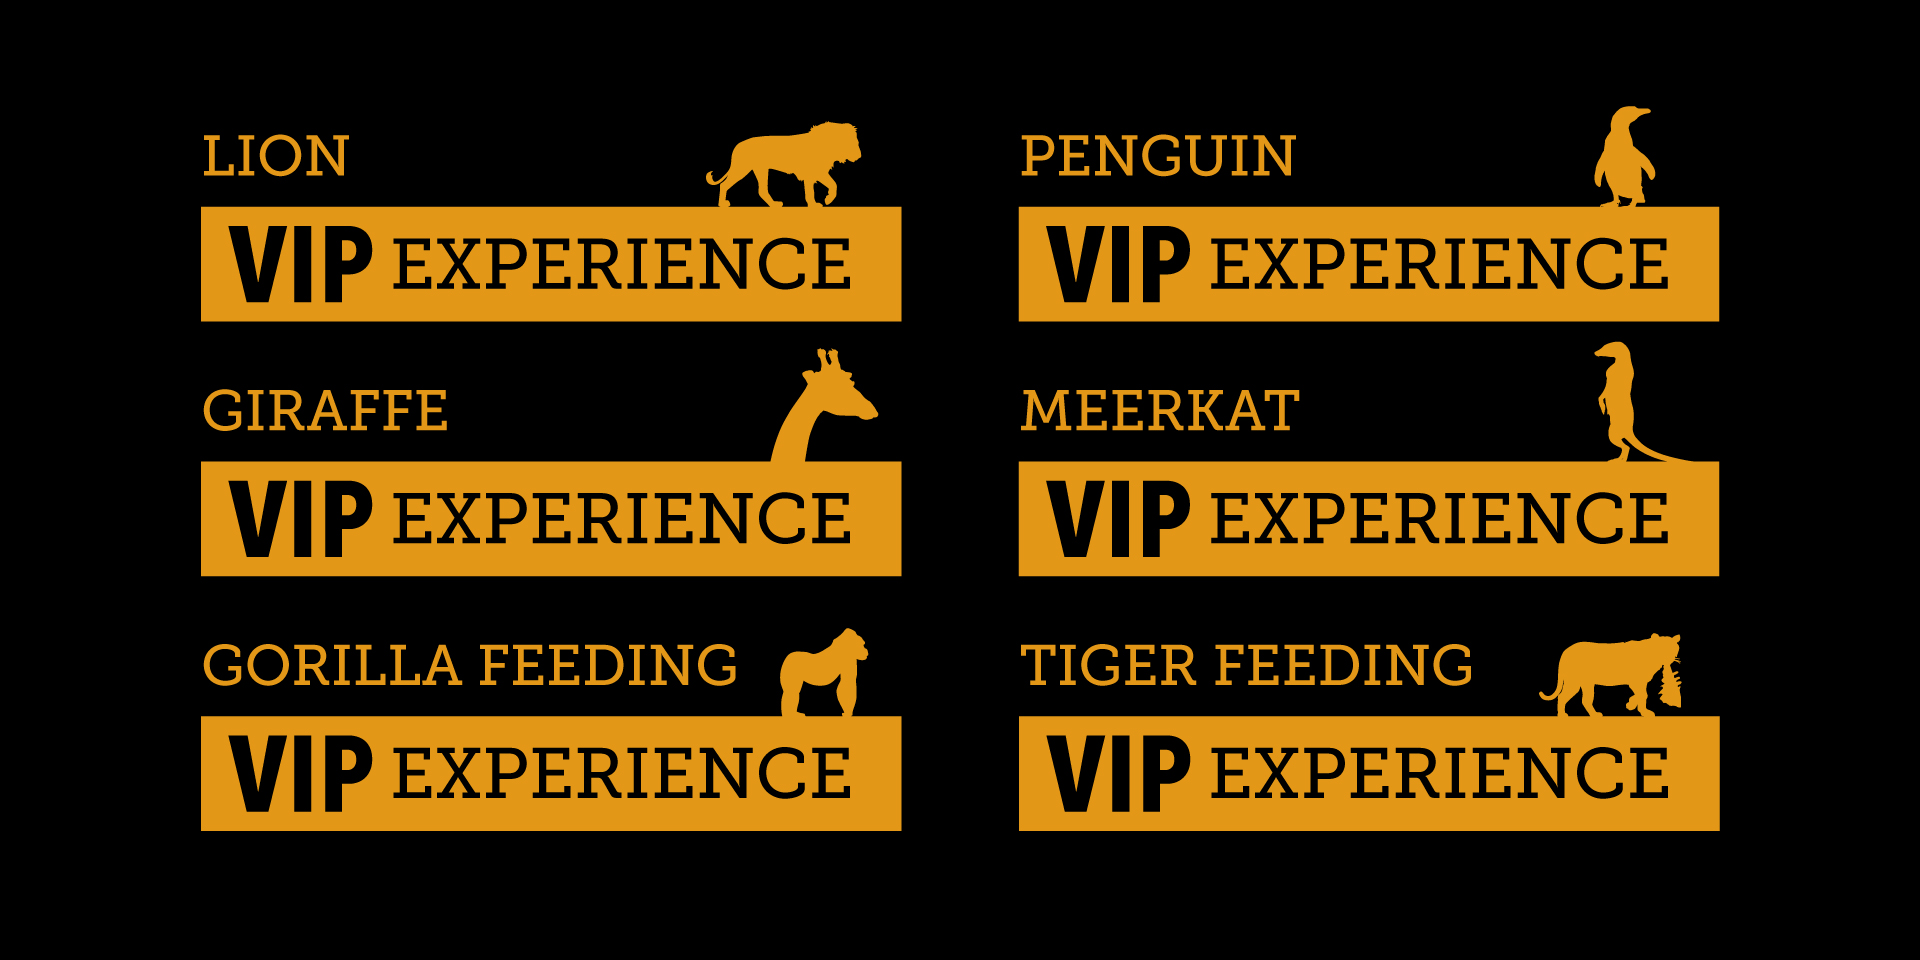 Longleat VIP experience icons and logos